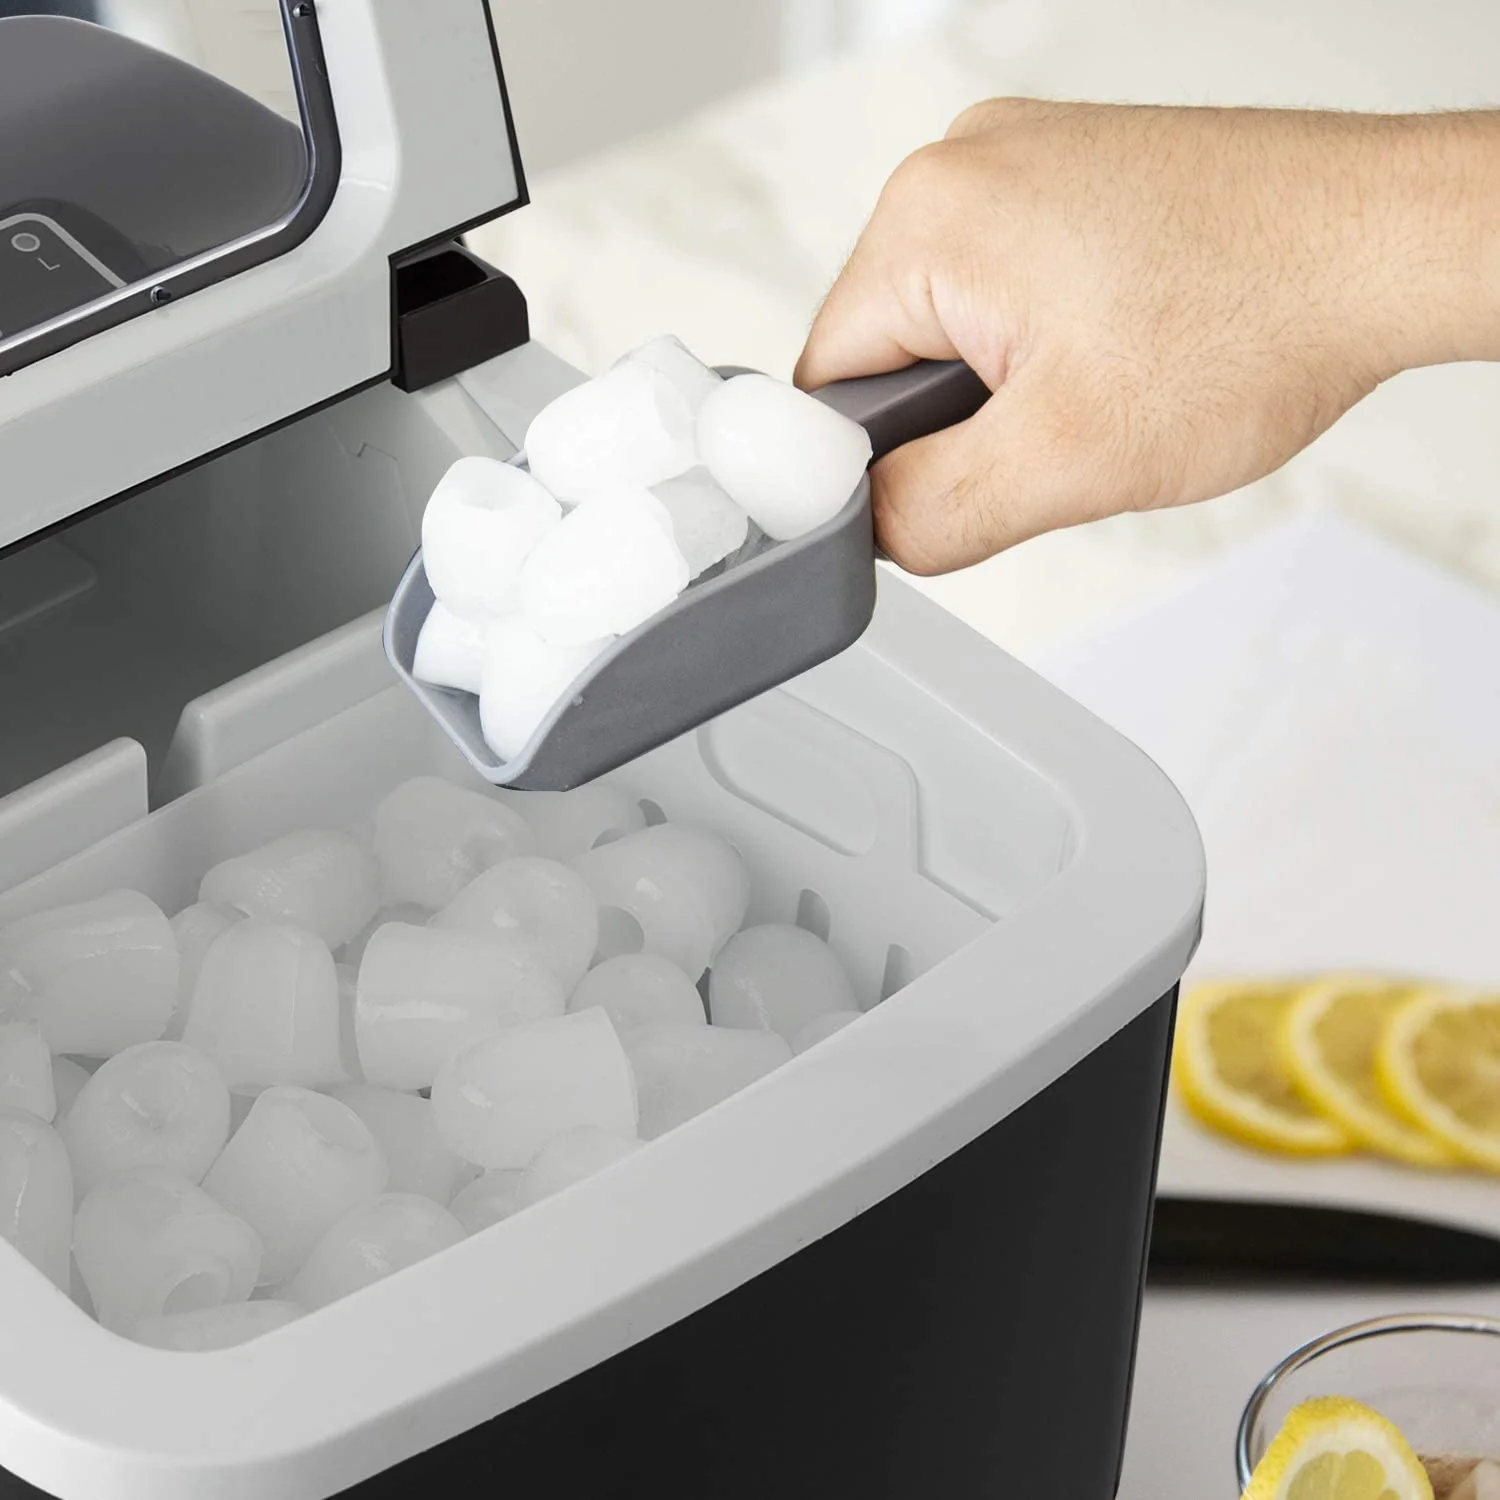 Freezimer DreamiceX2 | Nugget Ice Maker Countertop with Chewable Sonic Ice  | Self-Cleaning Quiet Thick Insulation with Waterline | Pebble Ice Machine